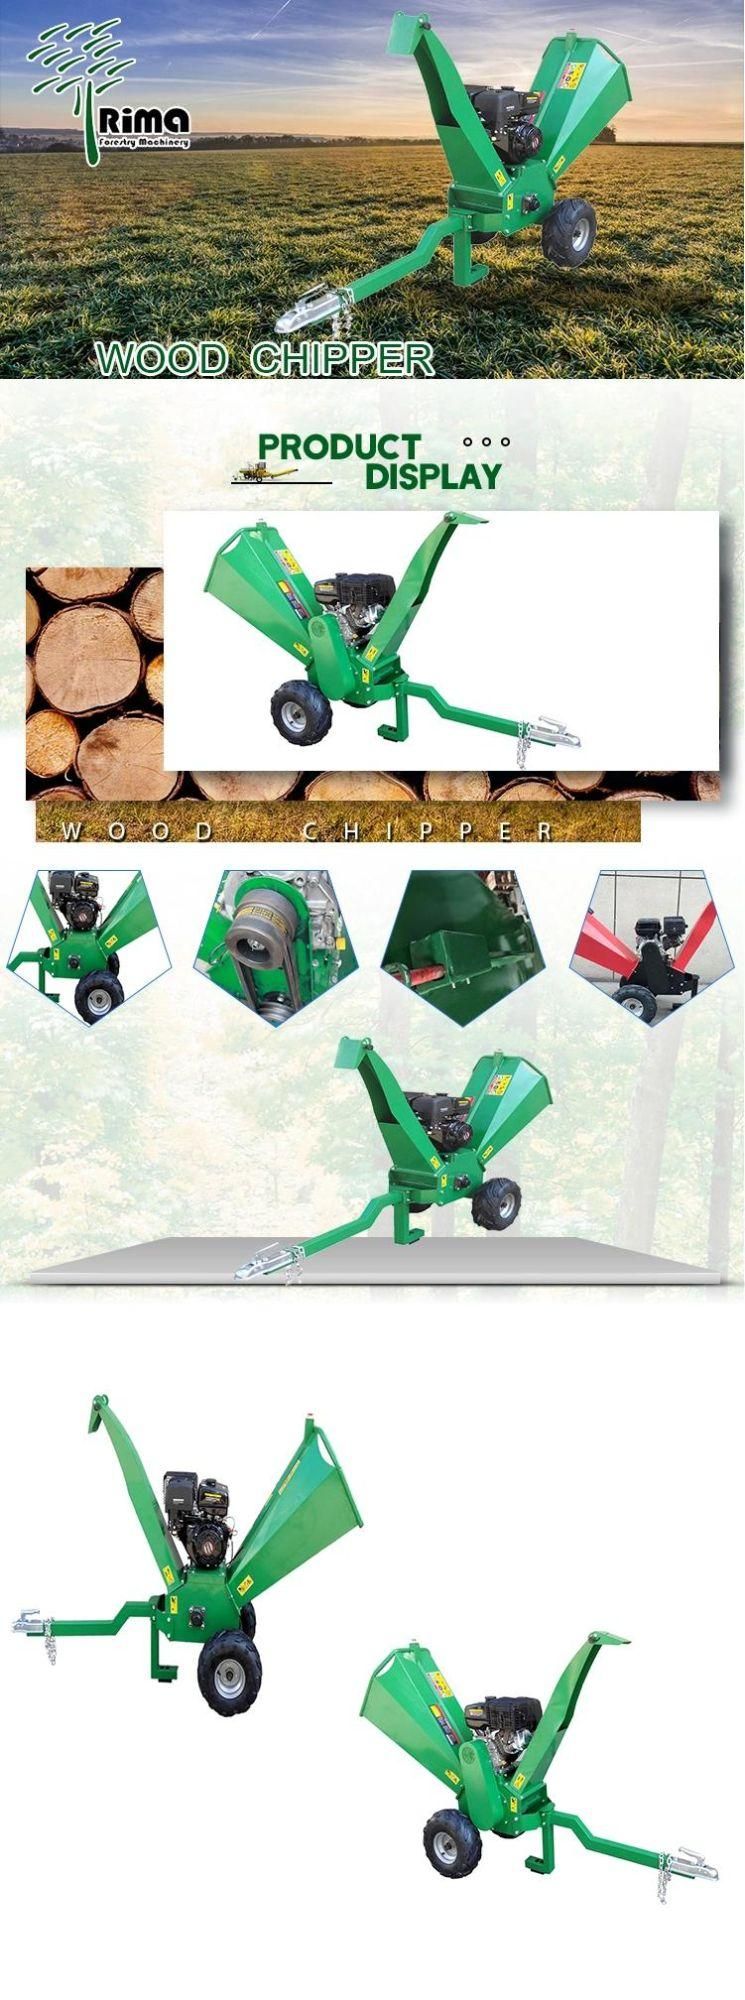 15HP Gasoline Powered Wood Chipper Mulcher with Electric Start